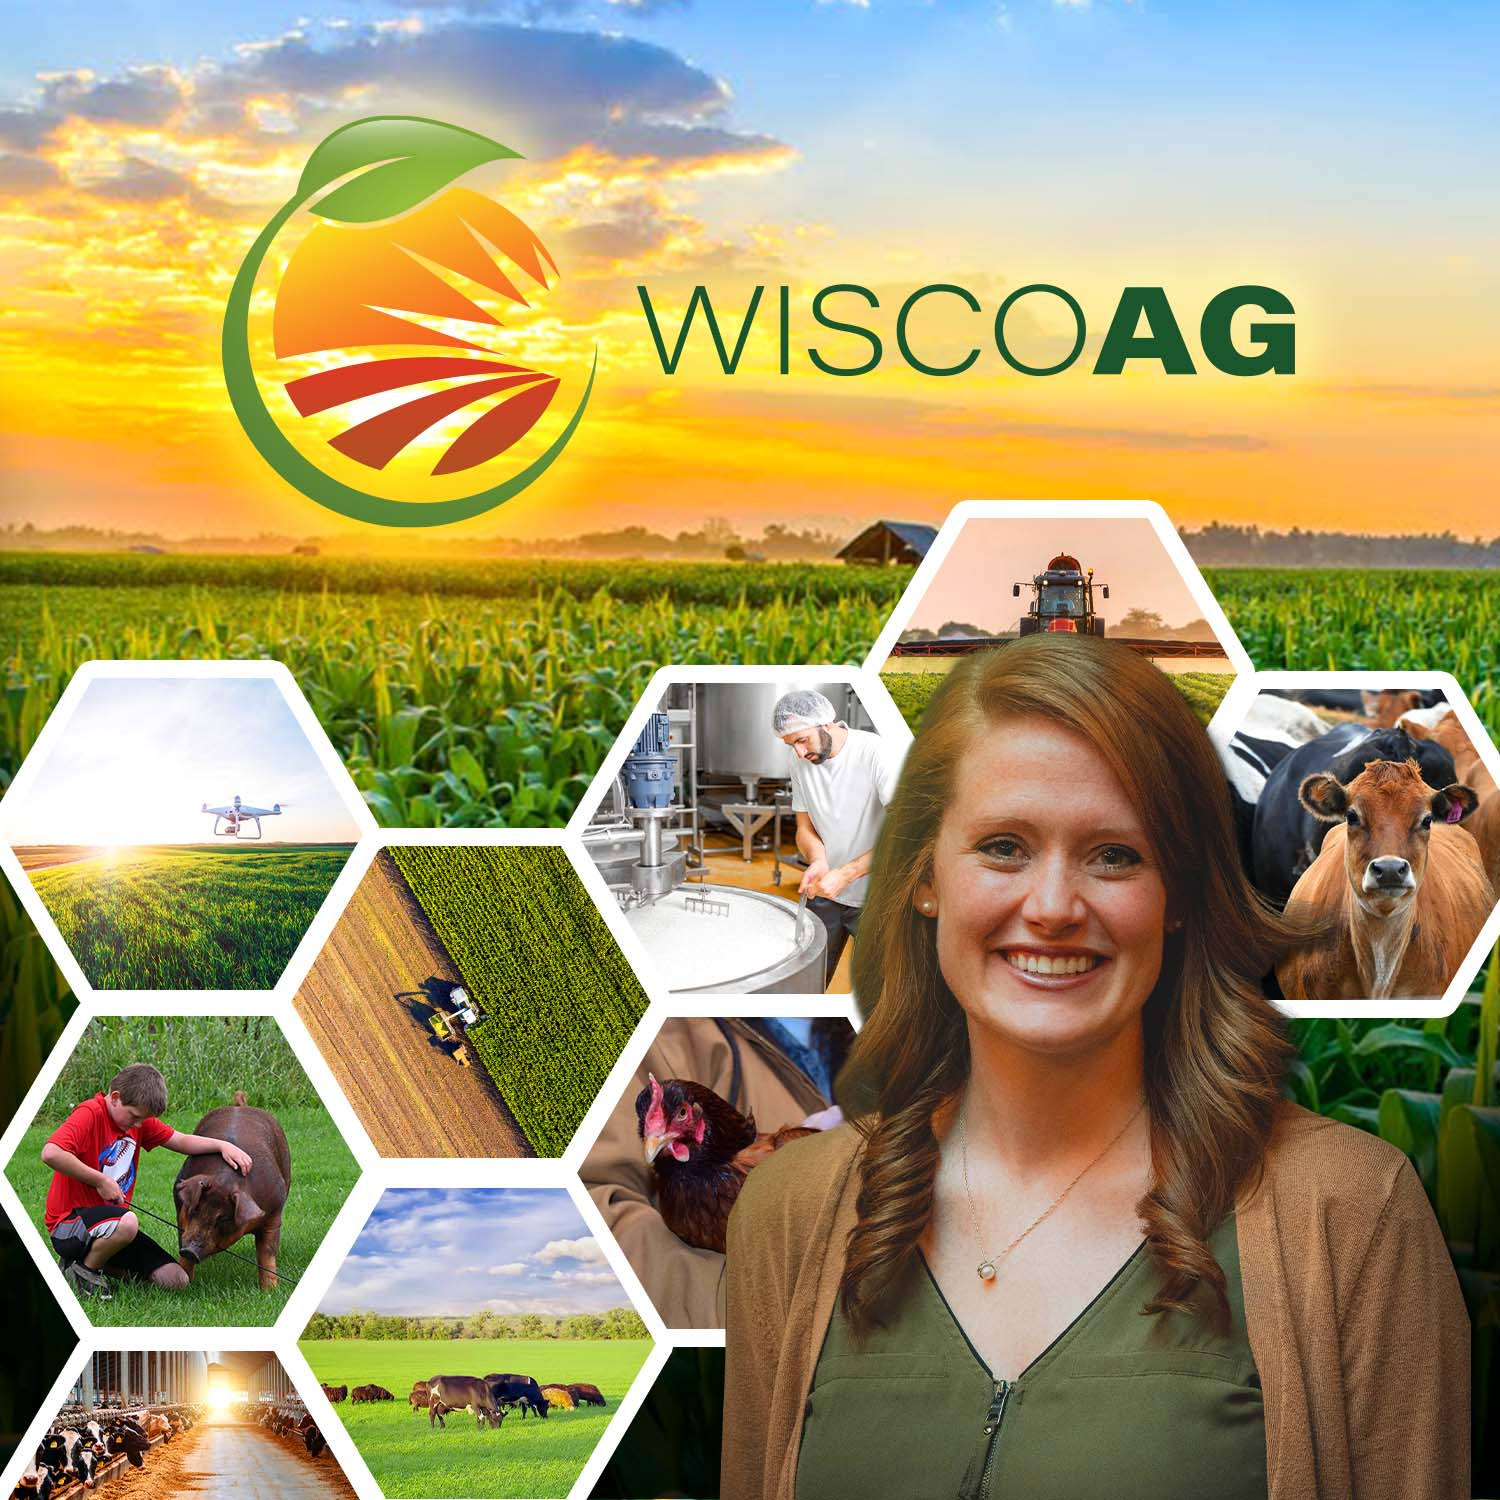 Report: Outagamie Co preparing for Breakfast on the Farm June 9 at Erickson Dairy Farm